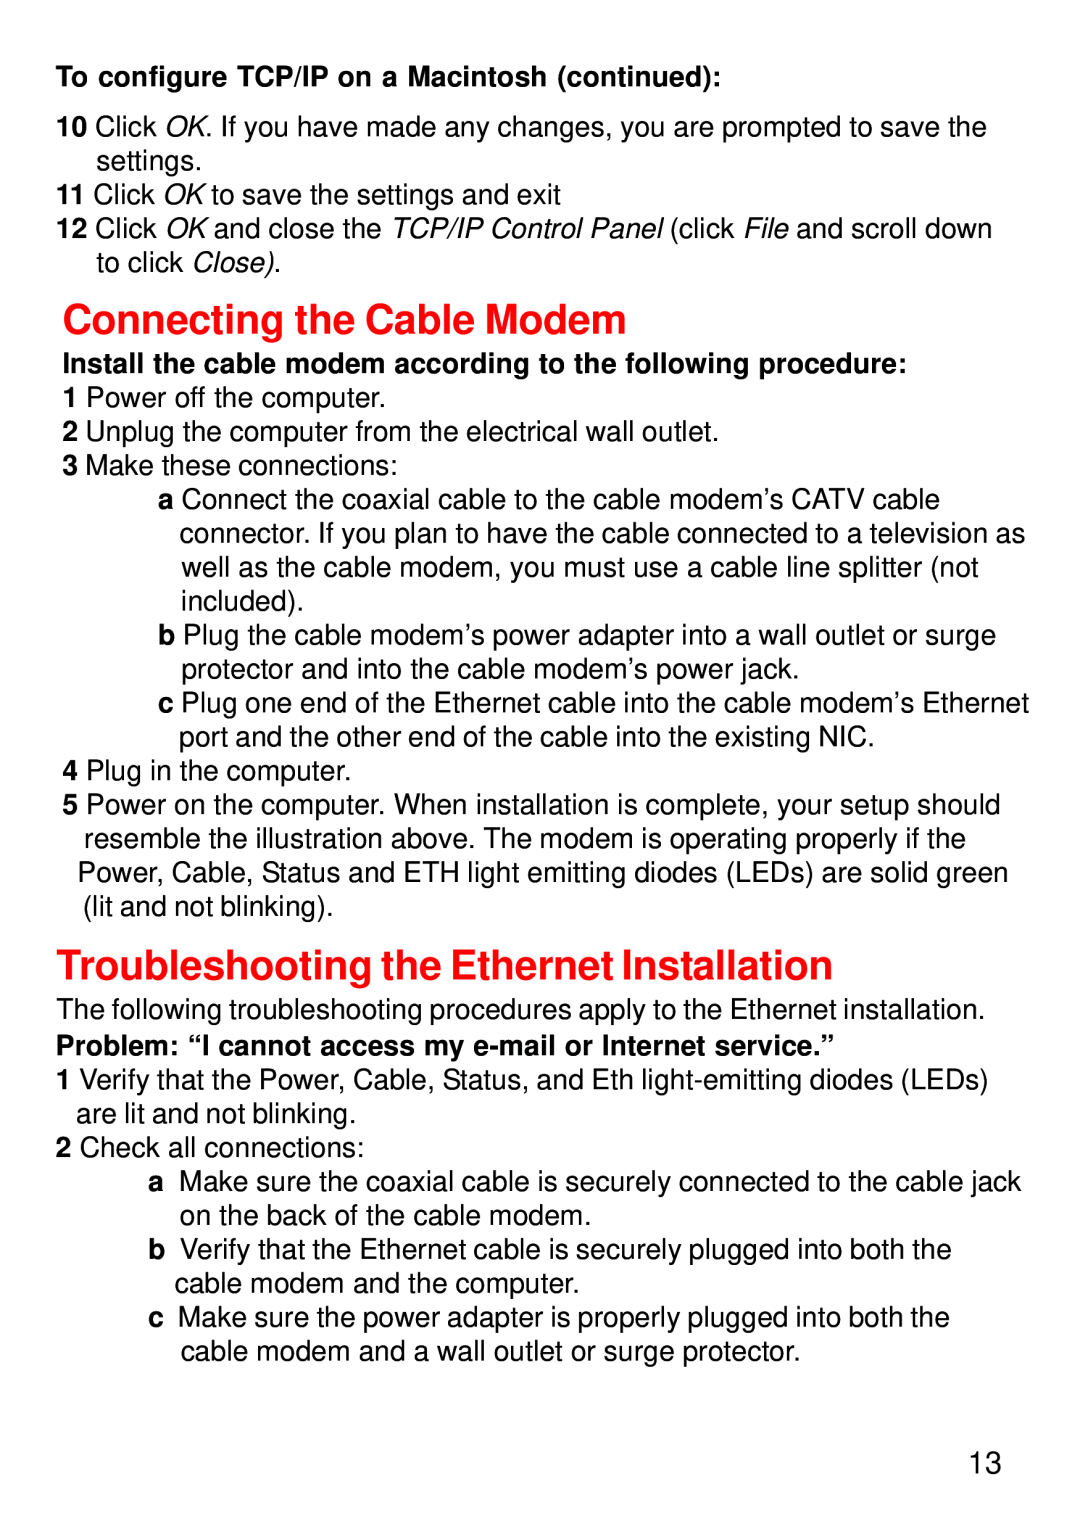 D-Link DCM-202 manual Connecting the Cable Modem, Troubleshooting the Ethernet Installation 